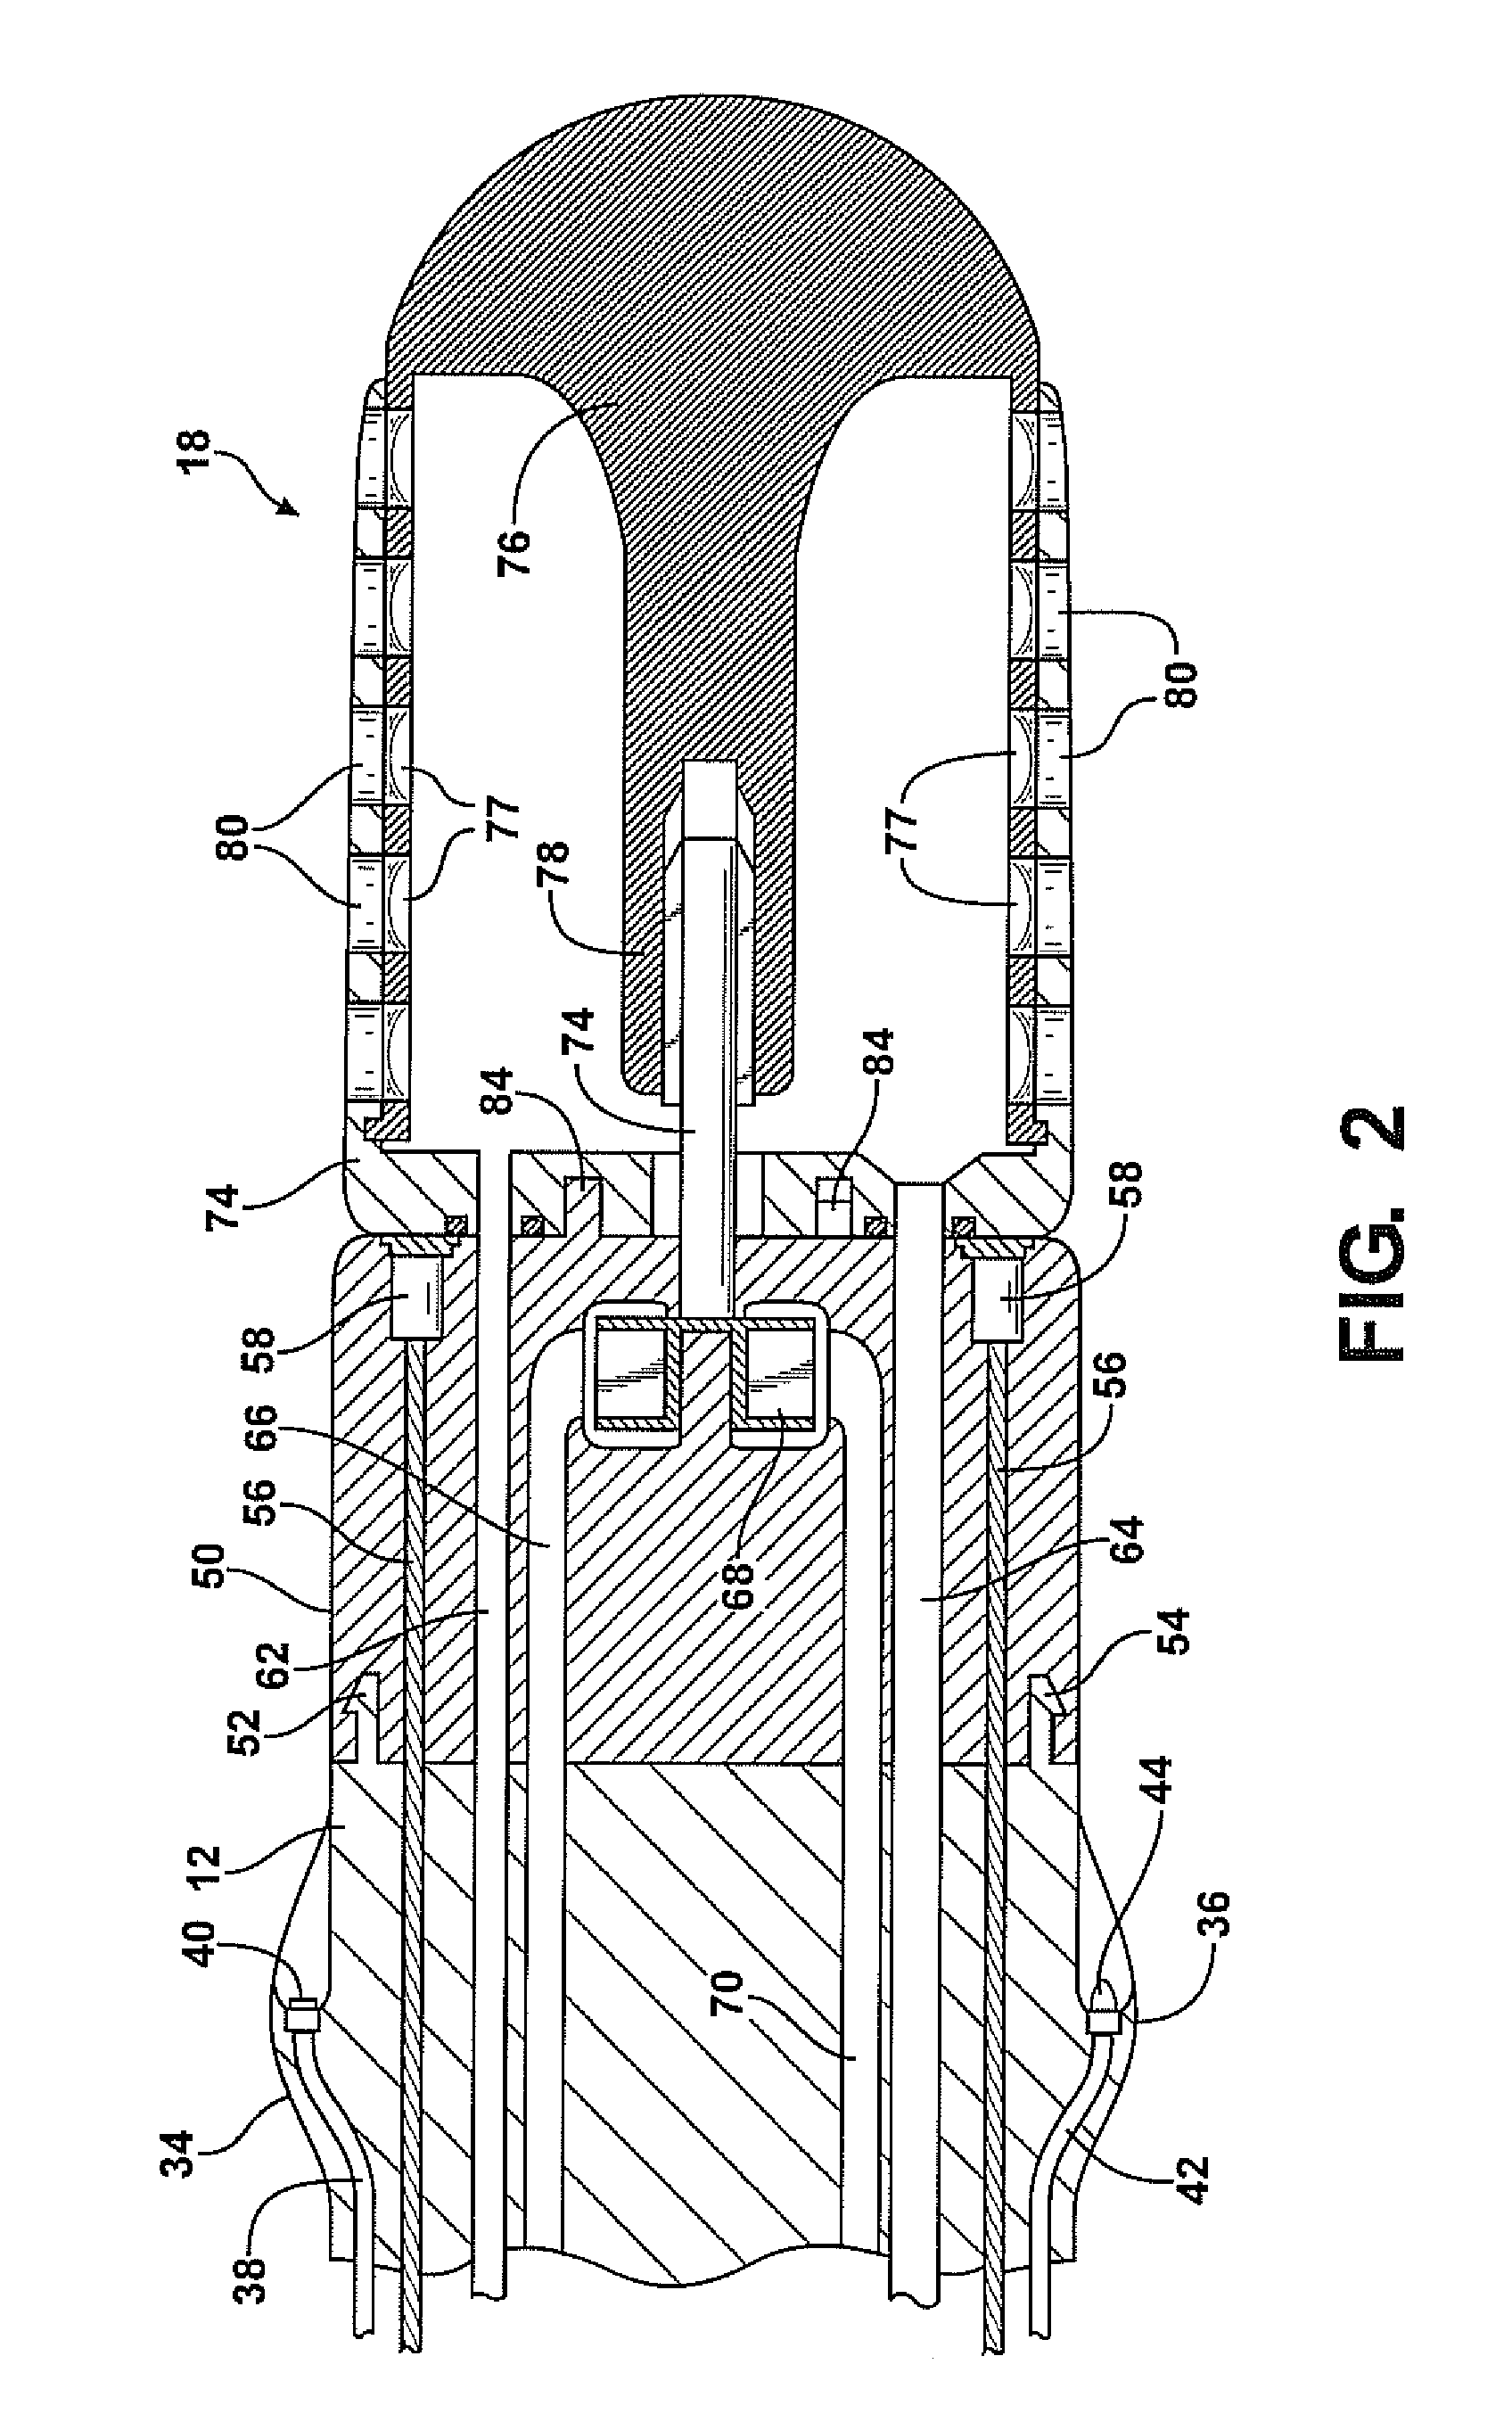 Endoscopic cutting and debriding device mounted on a flexible and maneuverable tube employing a fluid-driven turbine